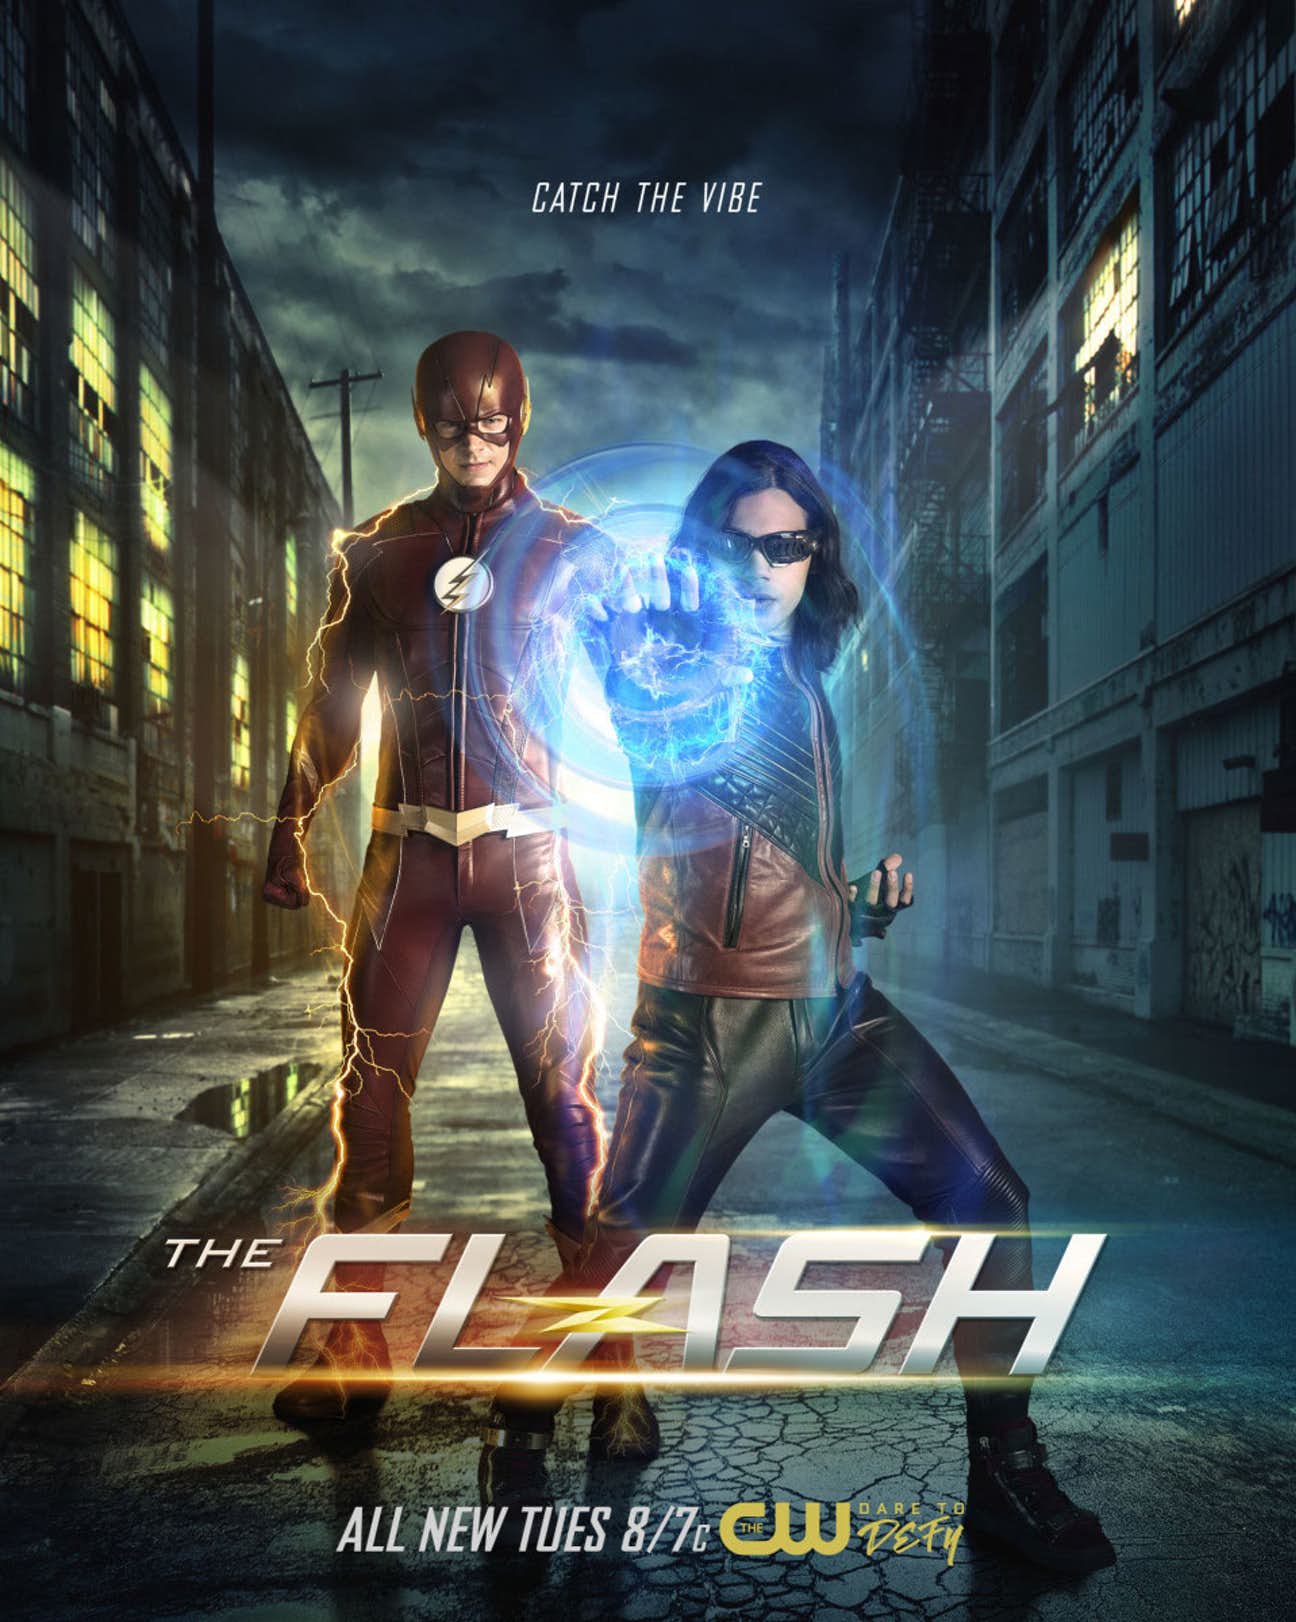 New Poster Released For The Flash Season 4